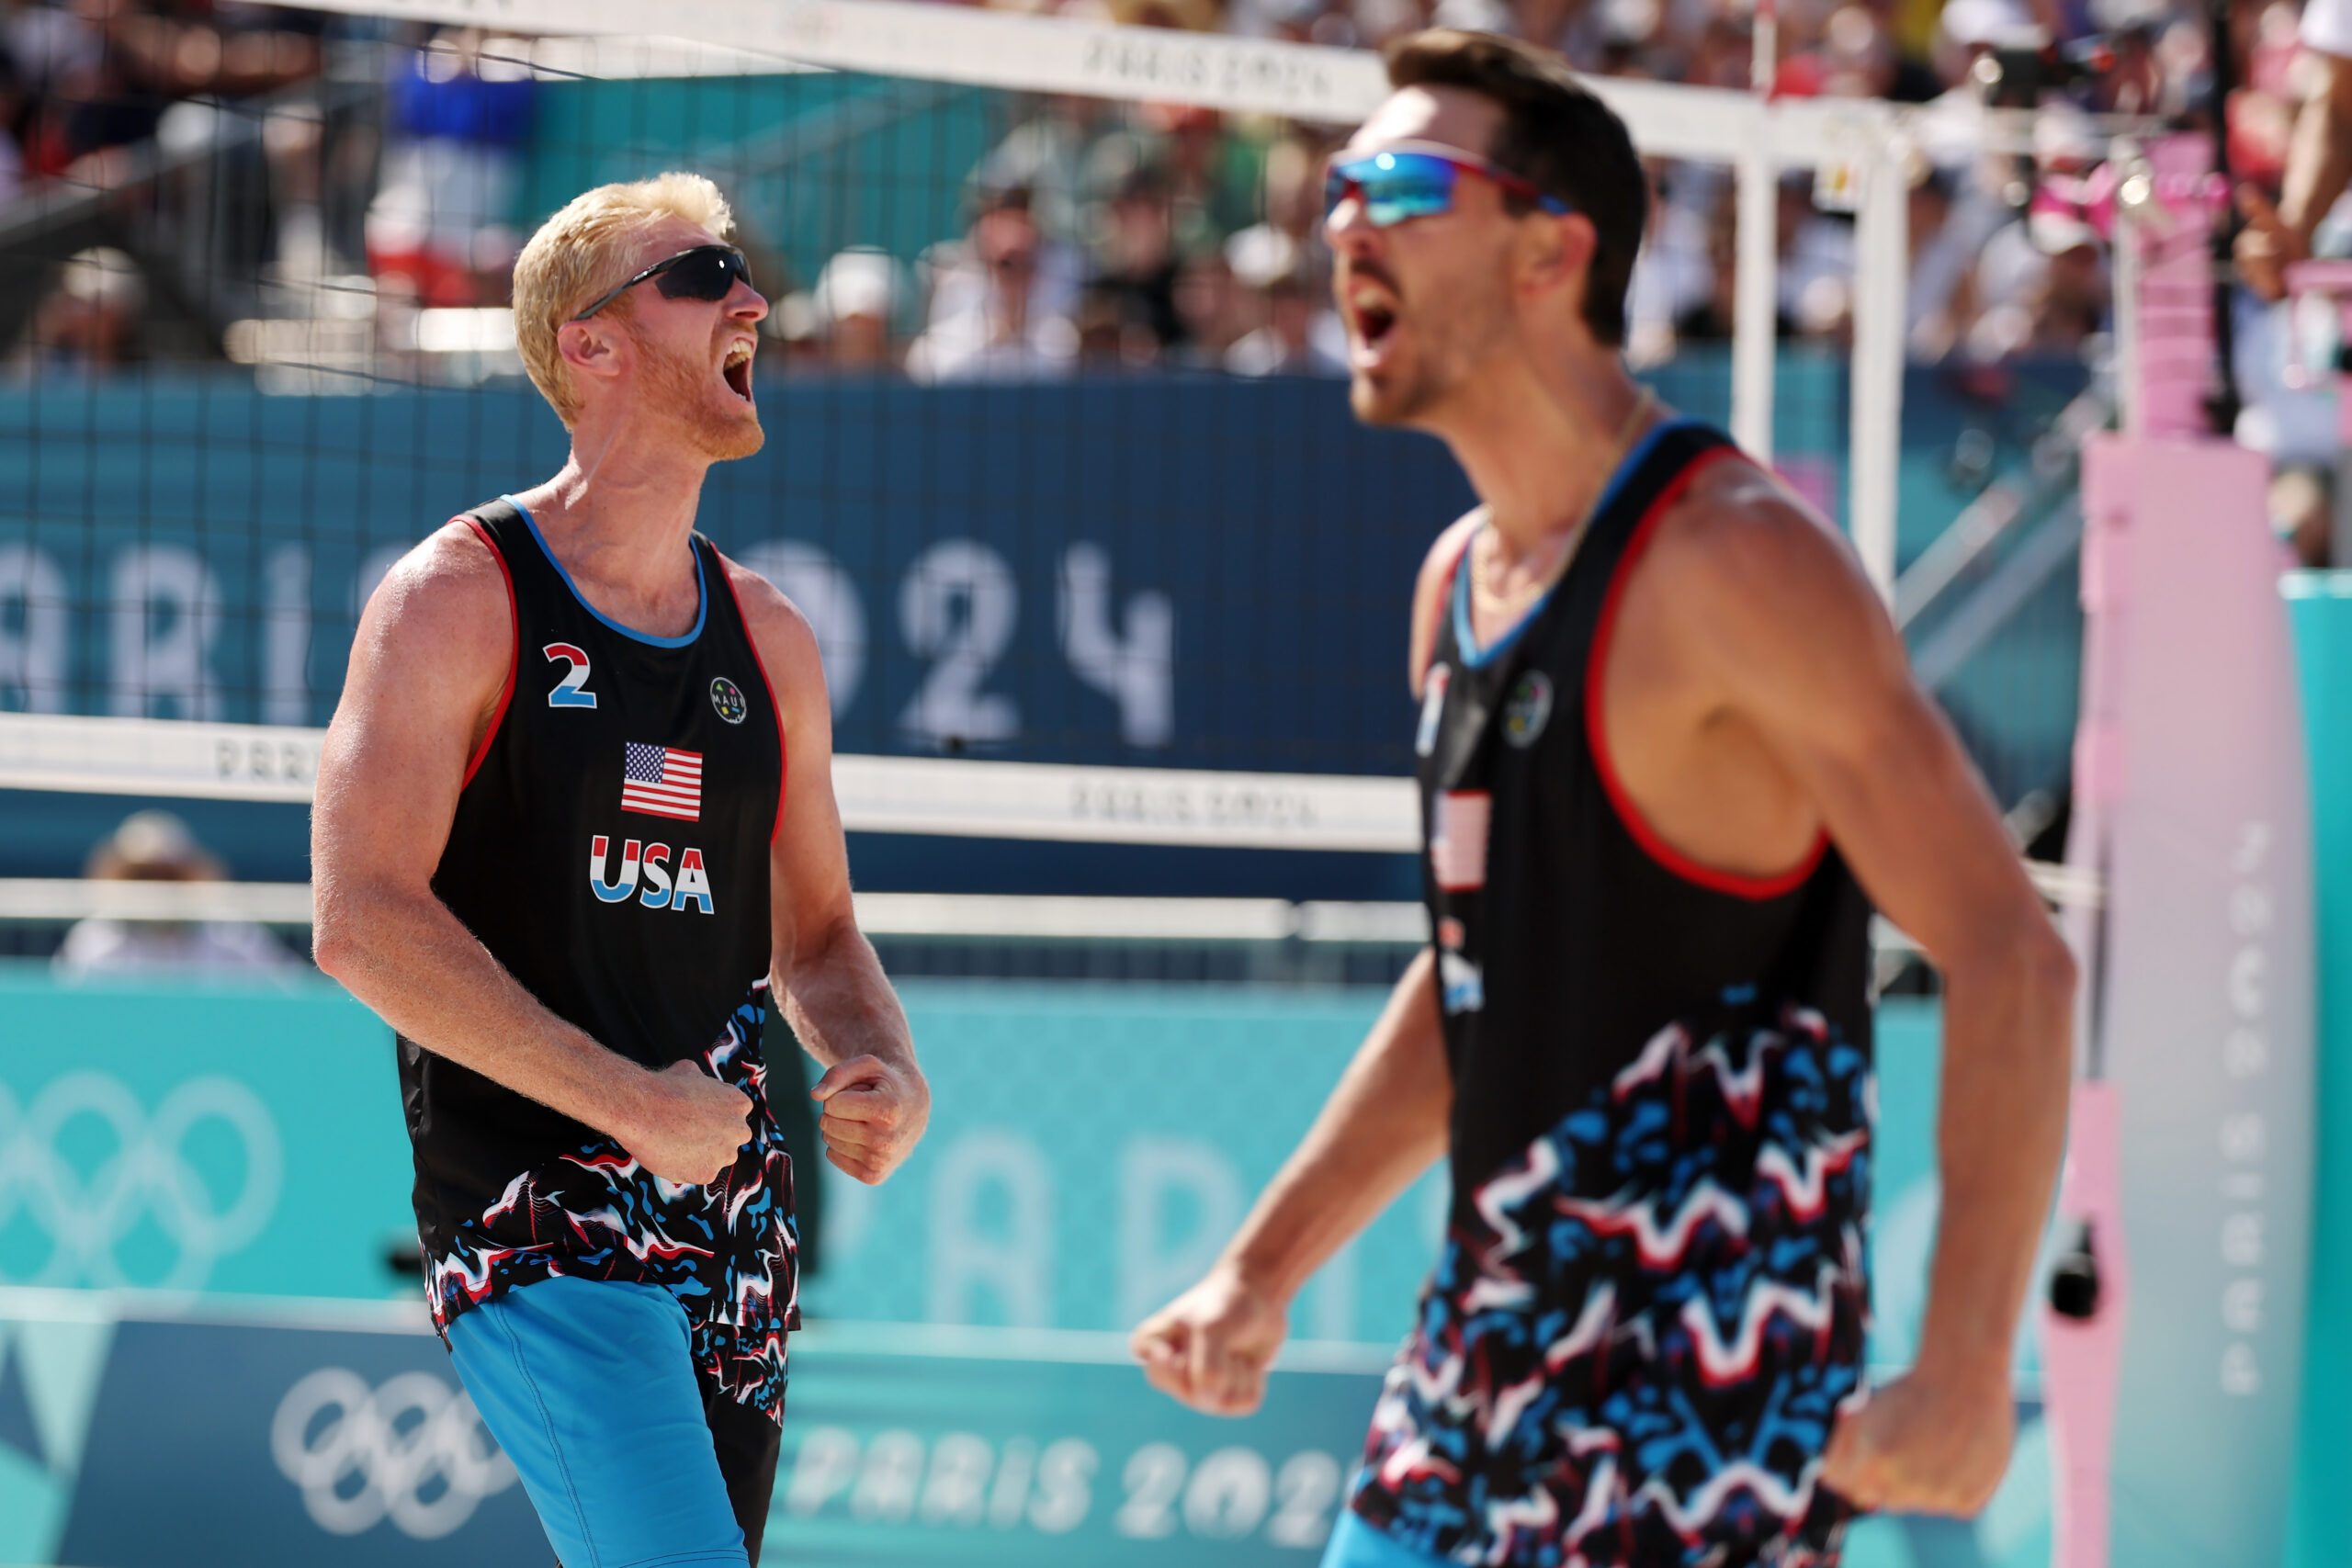 PARIS, FRANCE - JULY 29: Chase Budinger and Miles Evans of Team United States celebrate during the Men's Preliminary Phase - Pool F match against Team France on day three of the Olympic Games Paris 2024 at Eiffel Tower Stadium on July 29, 2024 in Paris, France. (Photo by Michael Reaves/Getty Images)